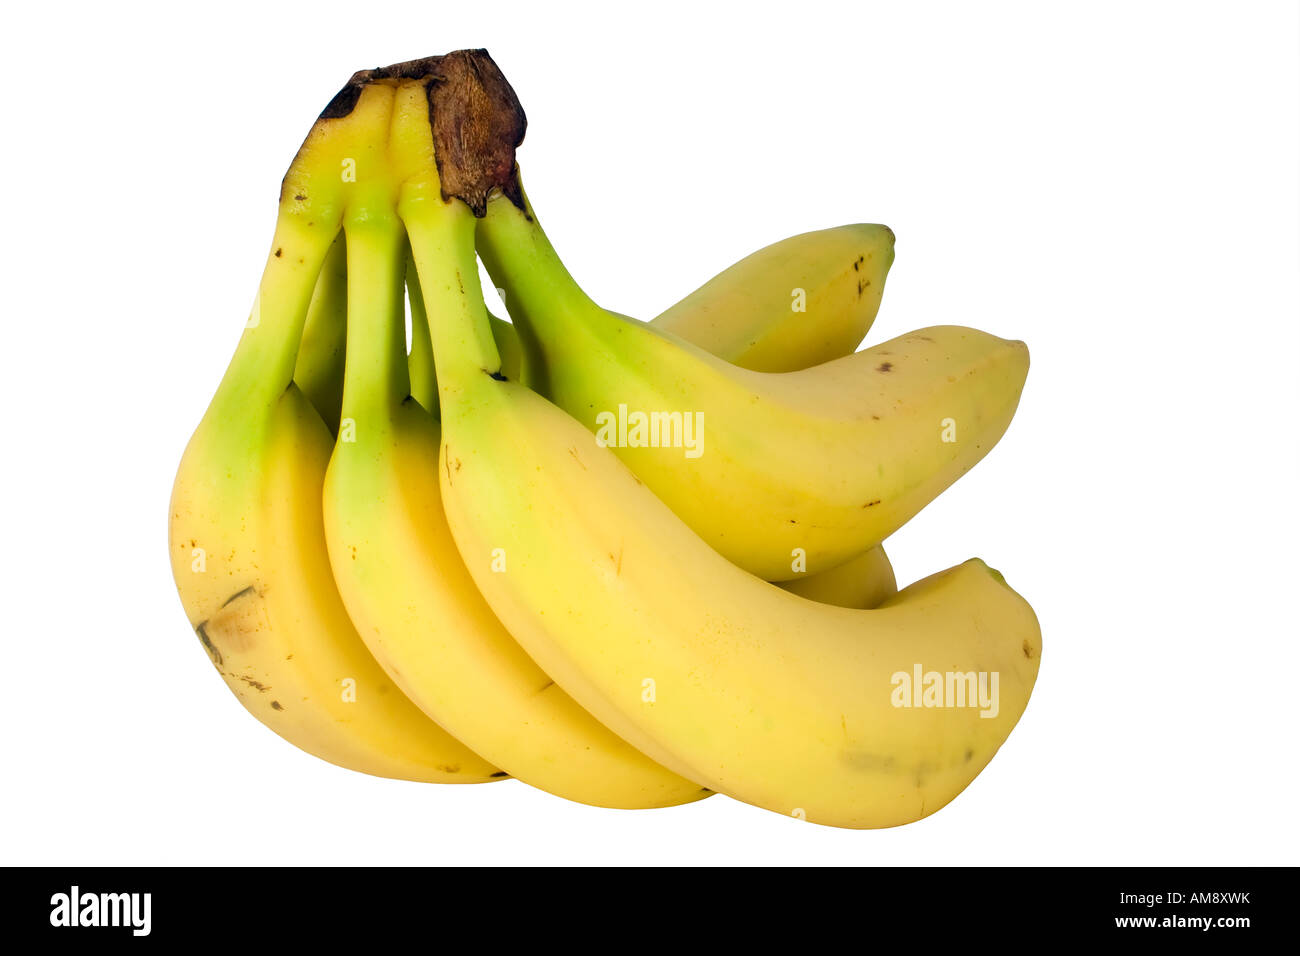 Cluster of ripe bananas isolated on white background Stock Photo